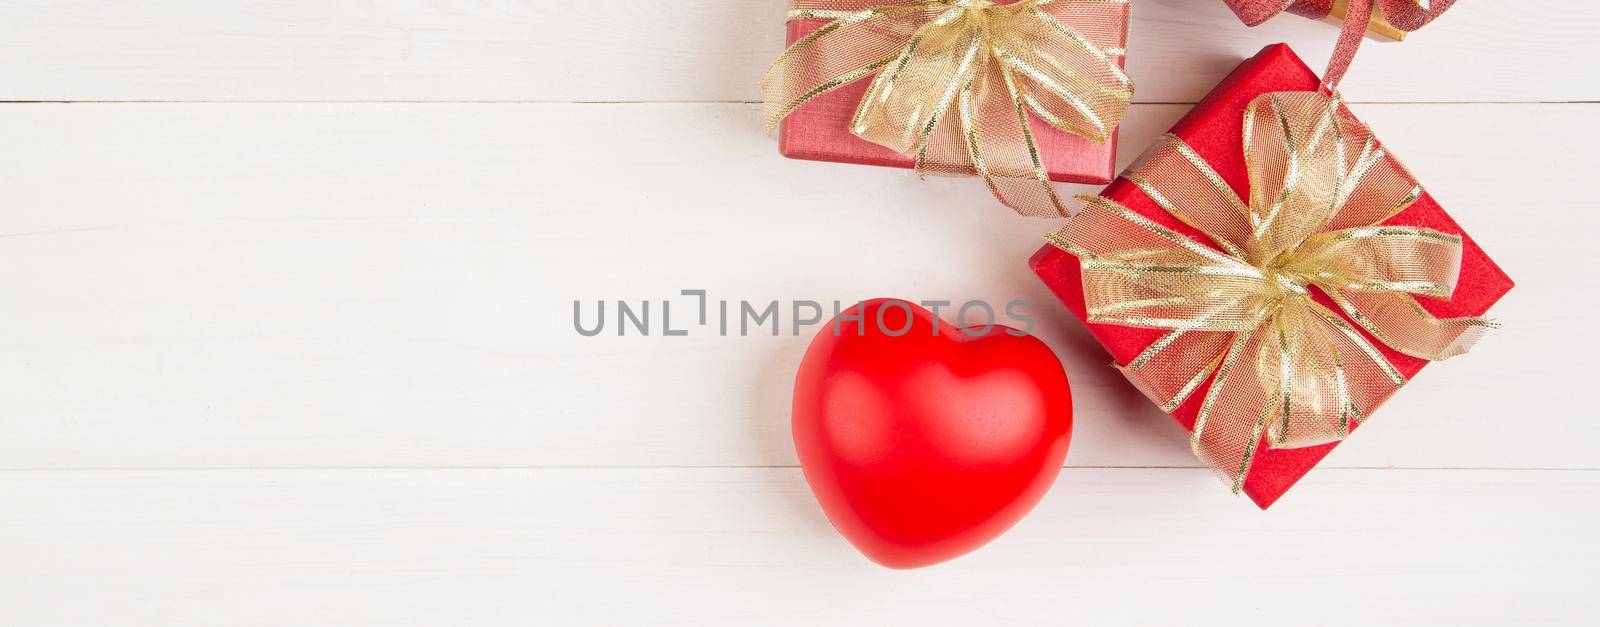 Gift box and heart shape on wooden table background, love and romance, presents in celebration and anniversary with surprise on desk, happy birthday, donate and charity, valentine day concept.